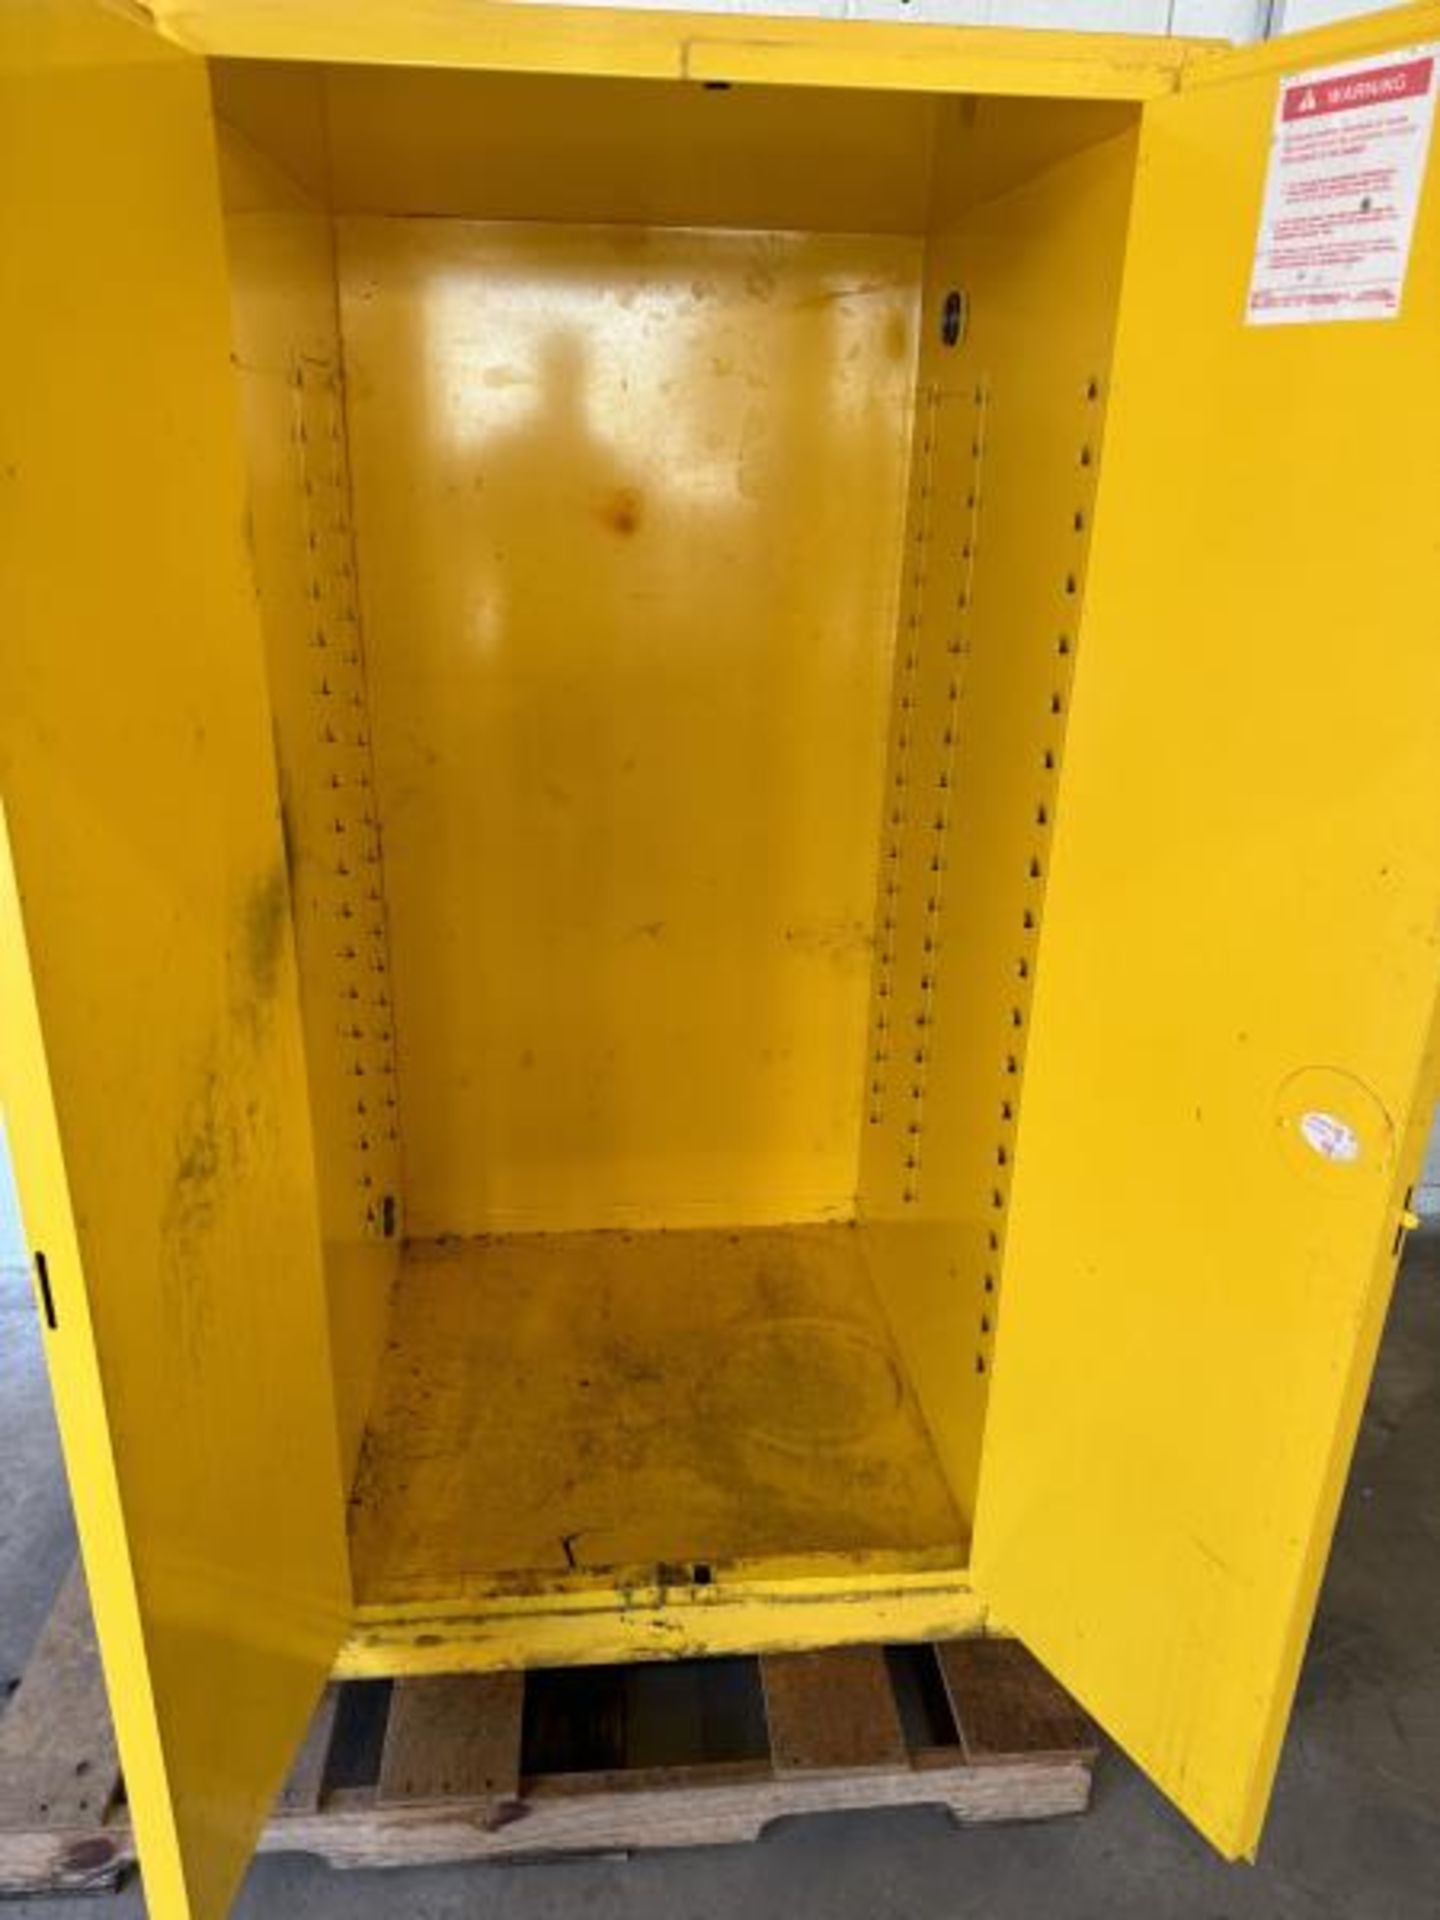 Justrite Flammable Liquid Storage Cabinet 34" Wide x 34" Deep x 66" Tall - Image 4 of 4